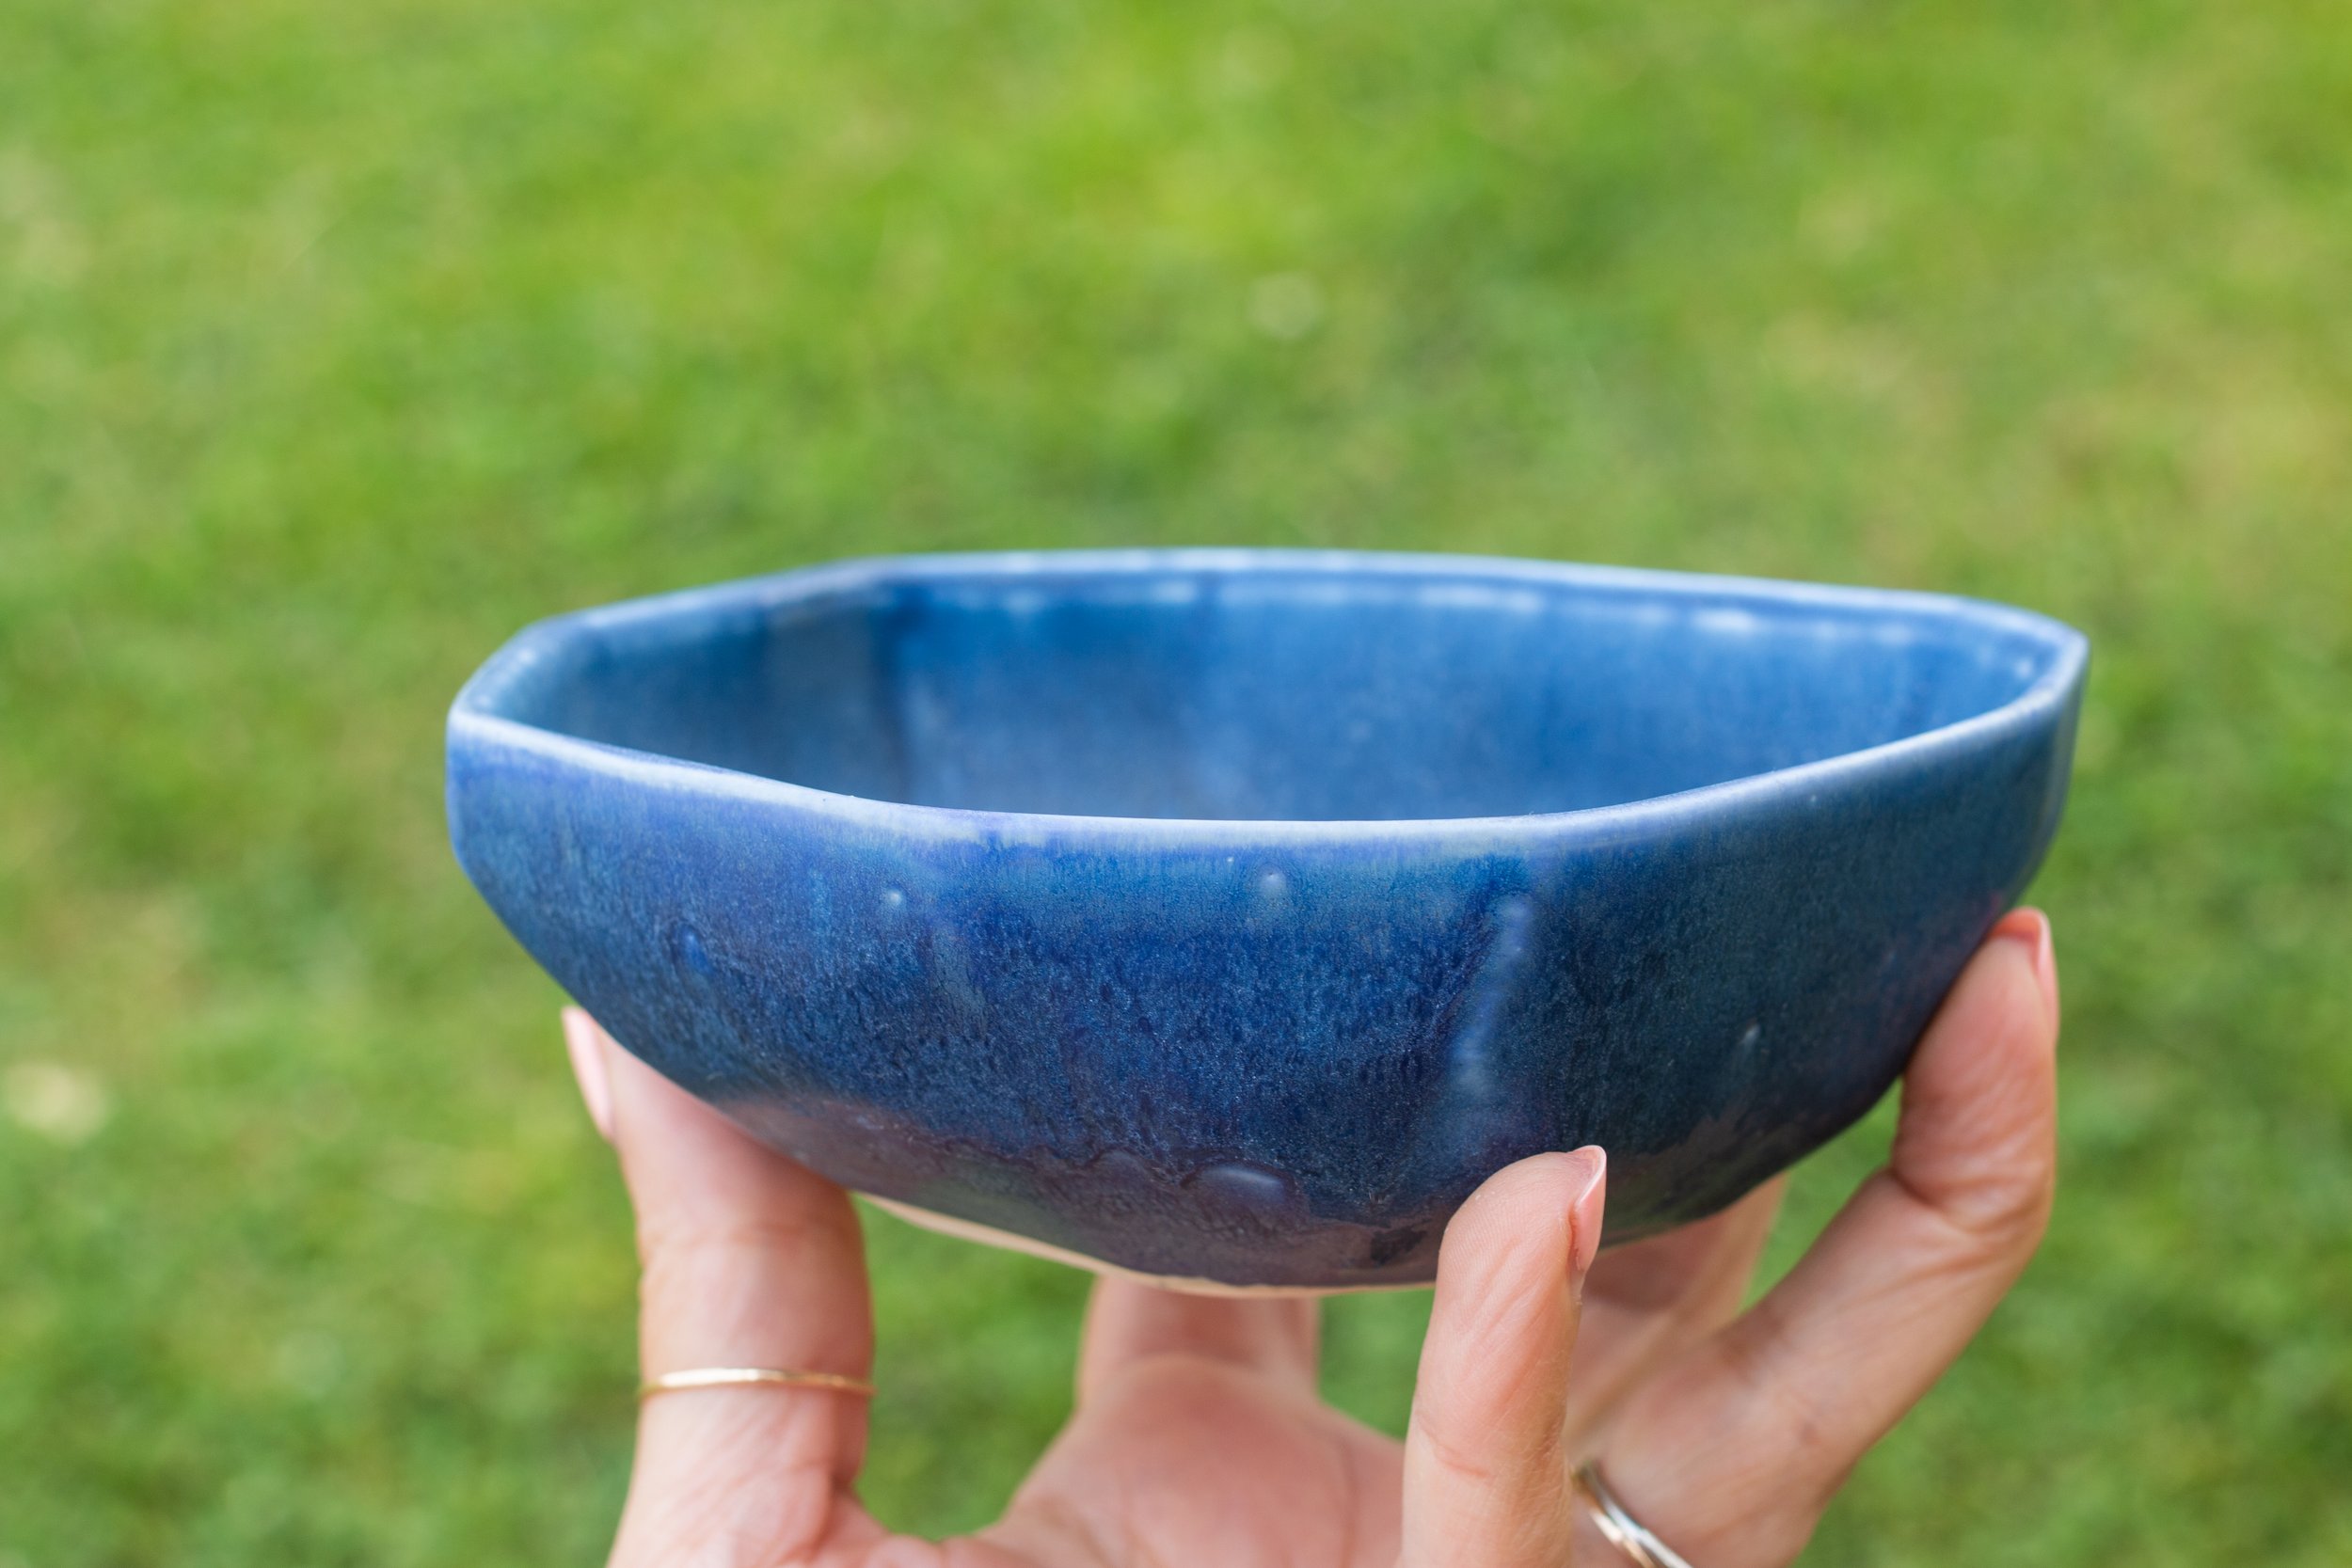  Small ice cream bowl created by Lauren HB Studio for the summer collection 